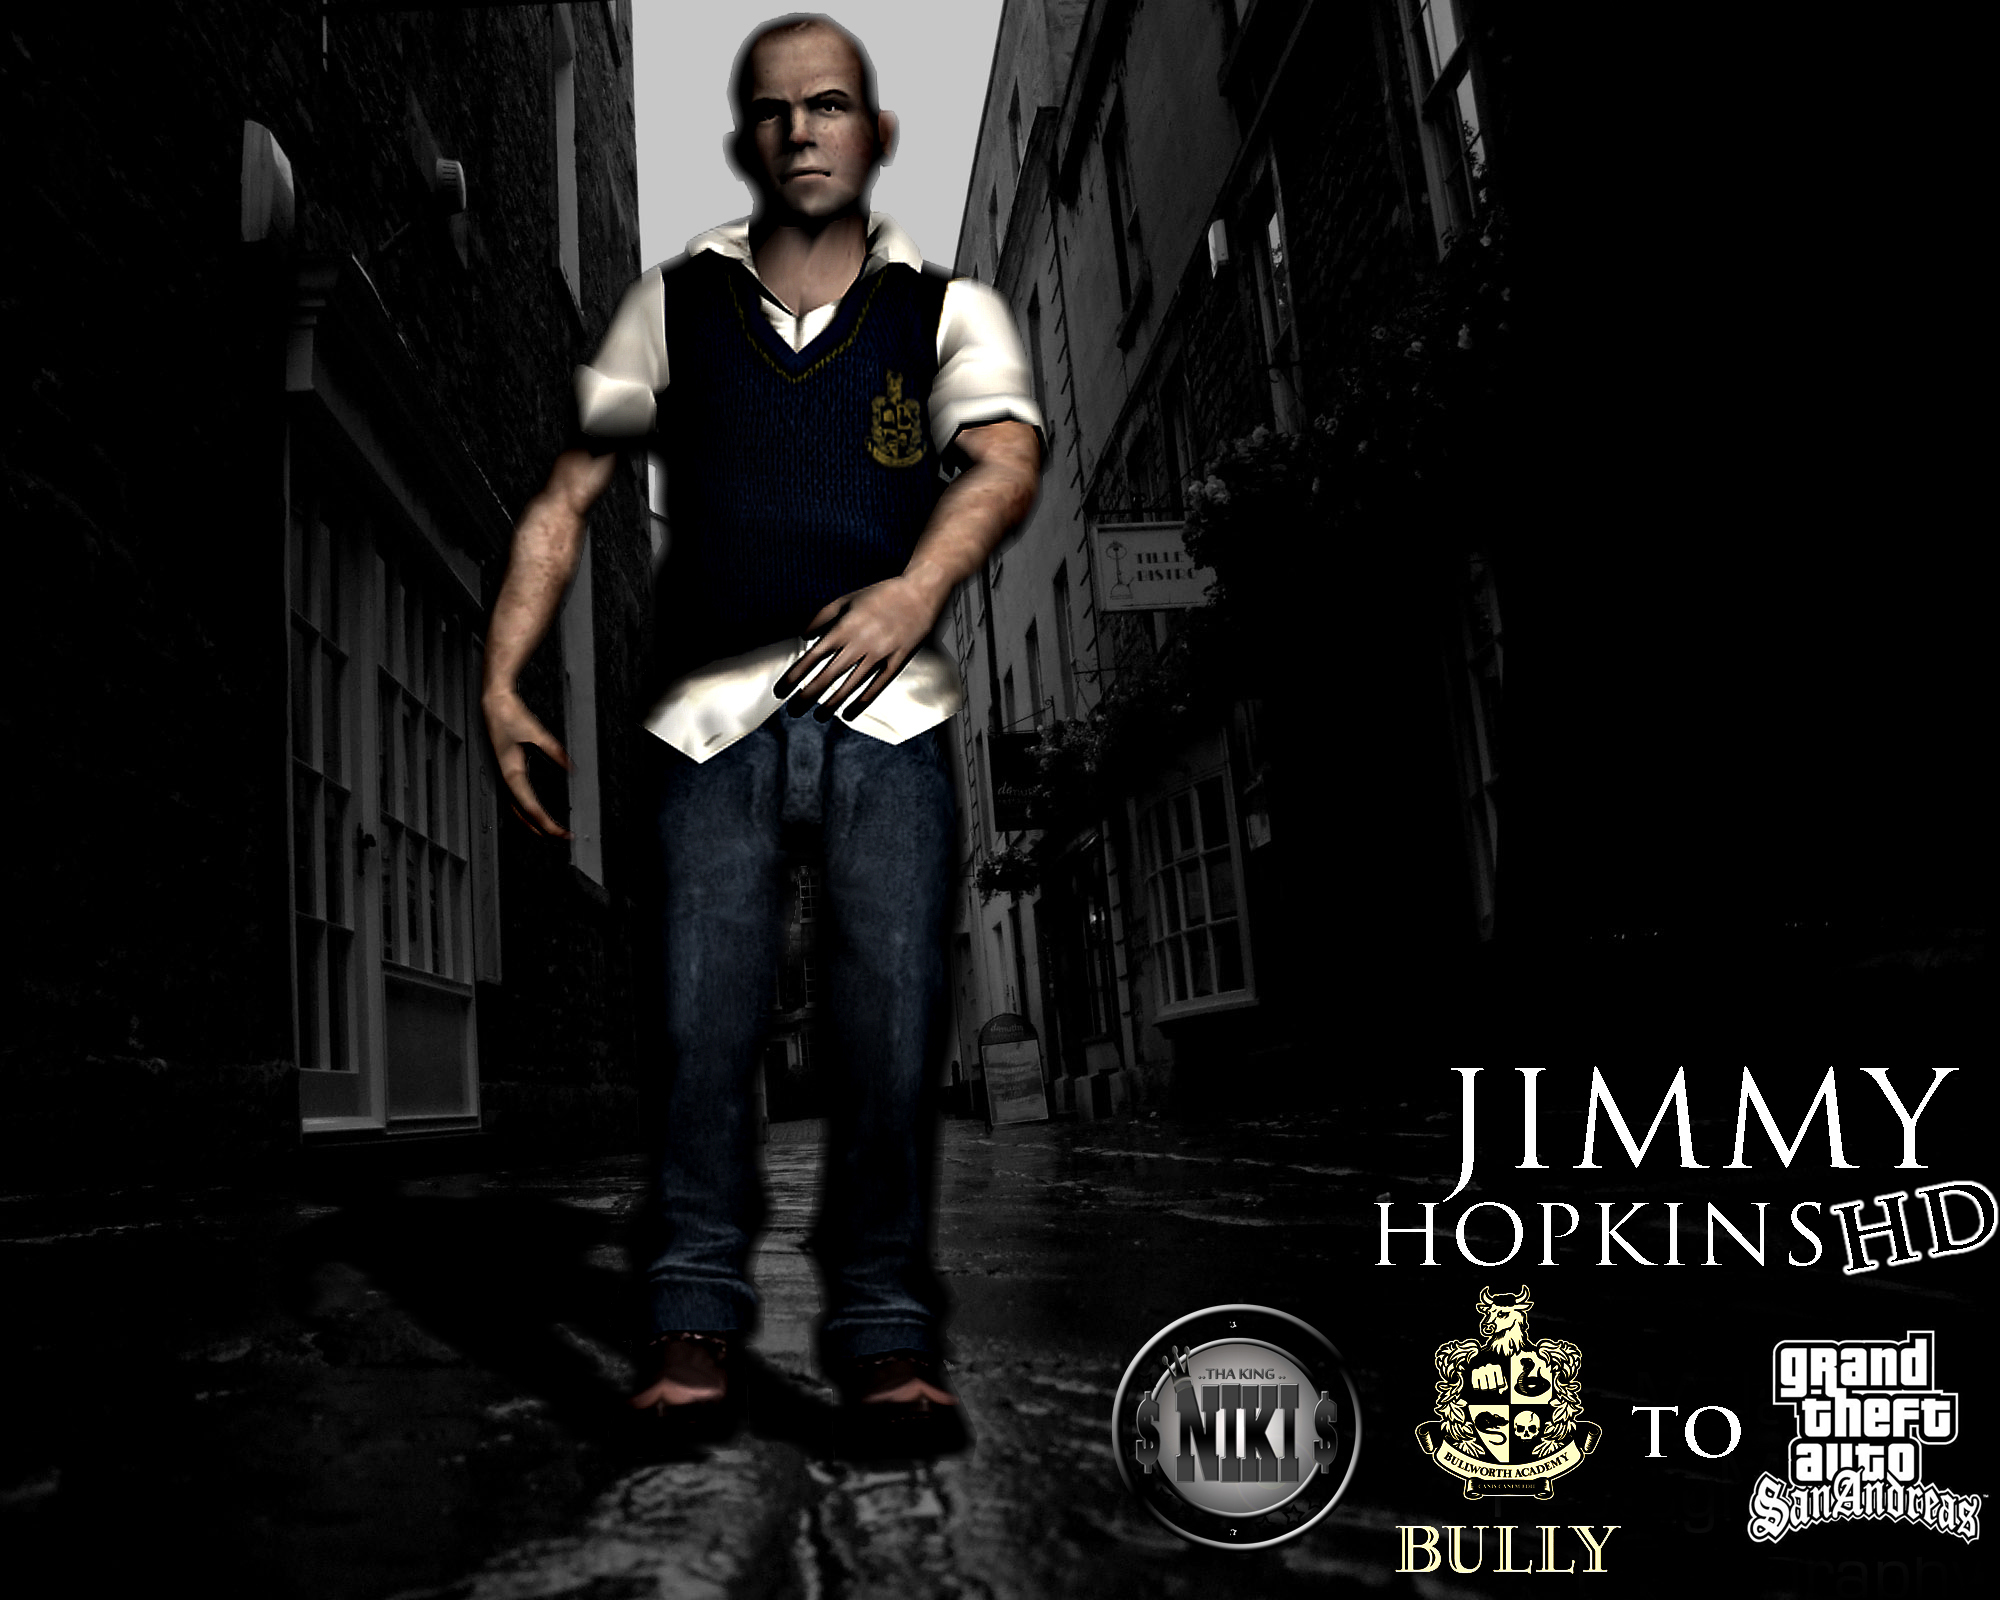 Jimmy Hopkins HD from Bully